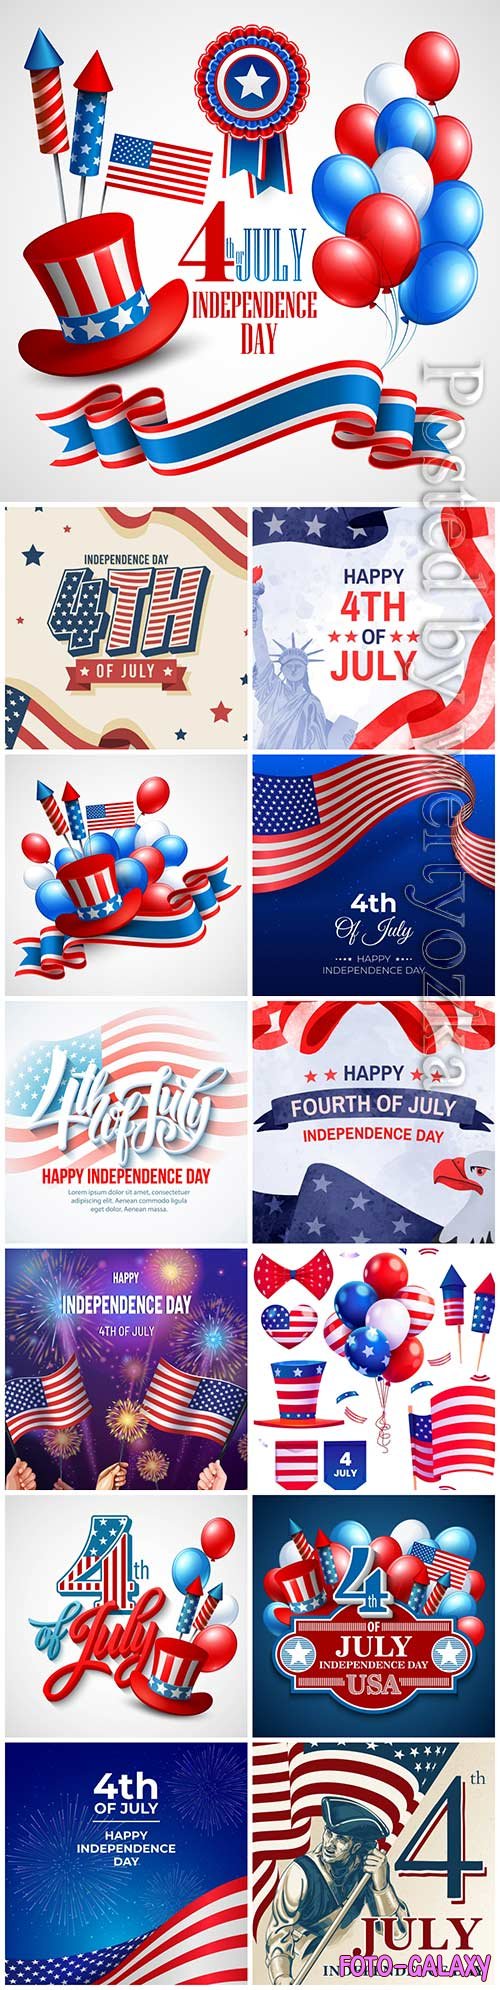 American independence day, 4th of july vector illustrations